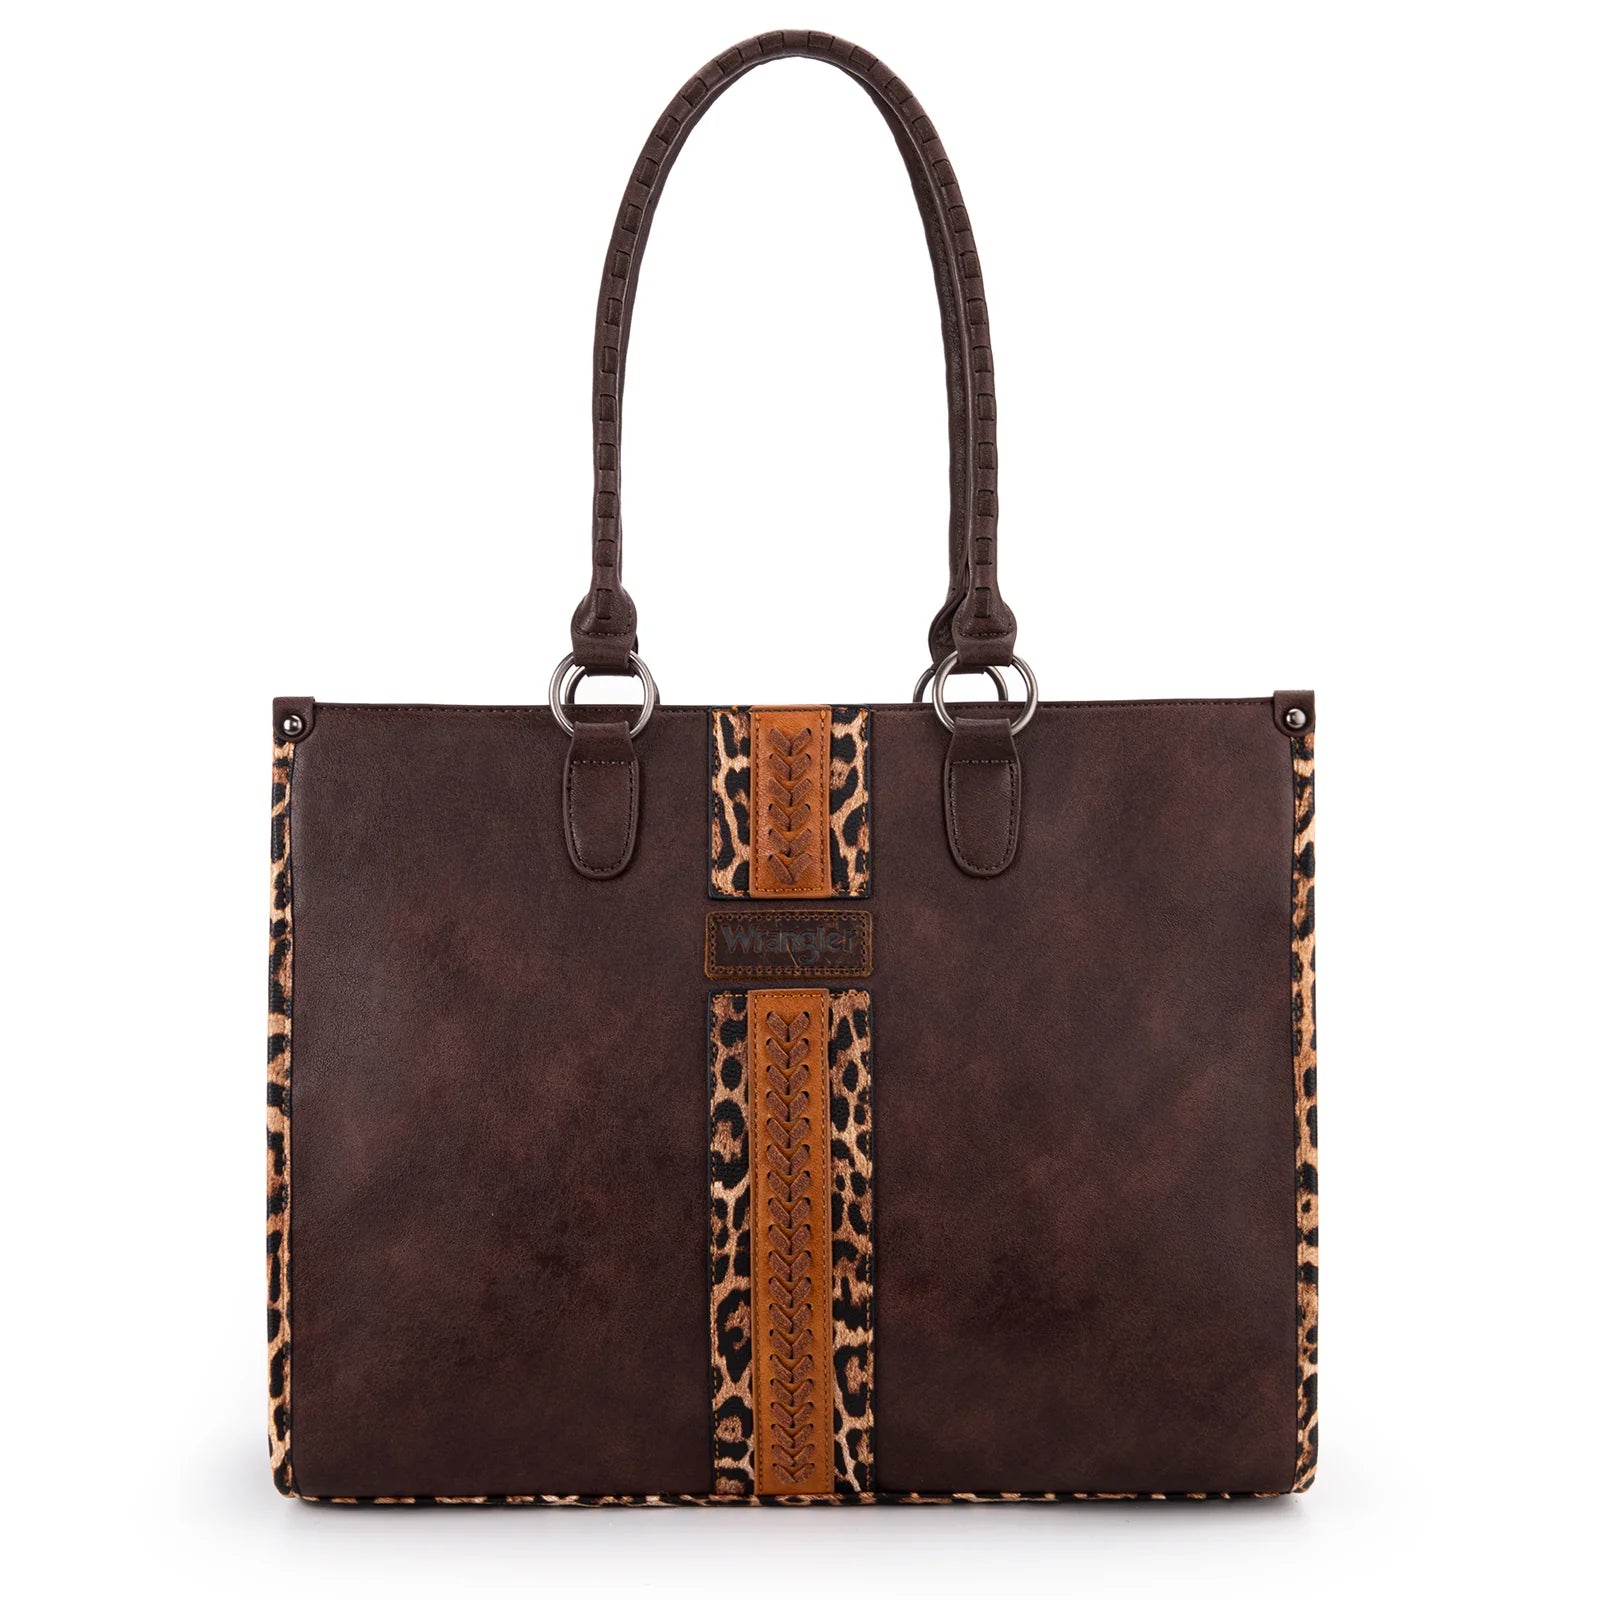 Leopard Print Concealed Carry Tote